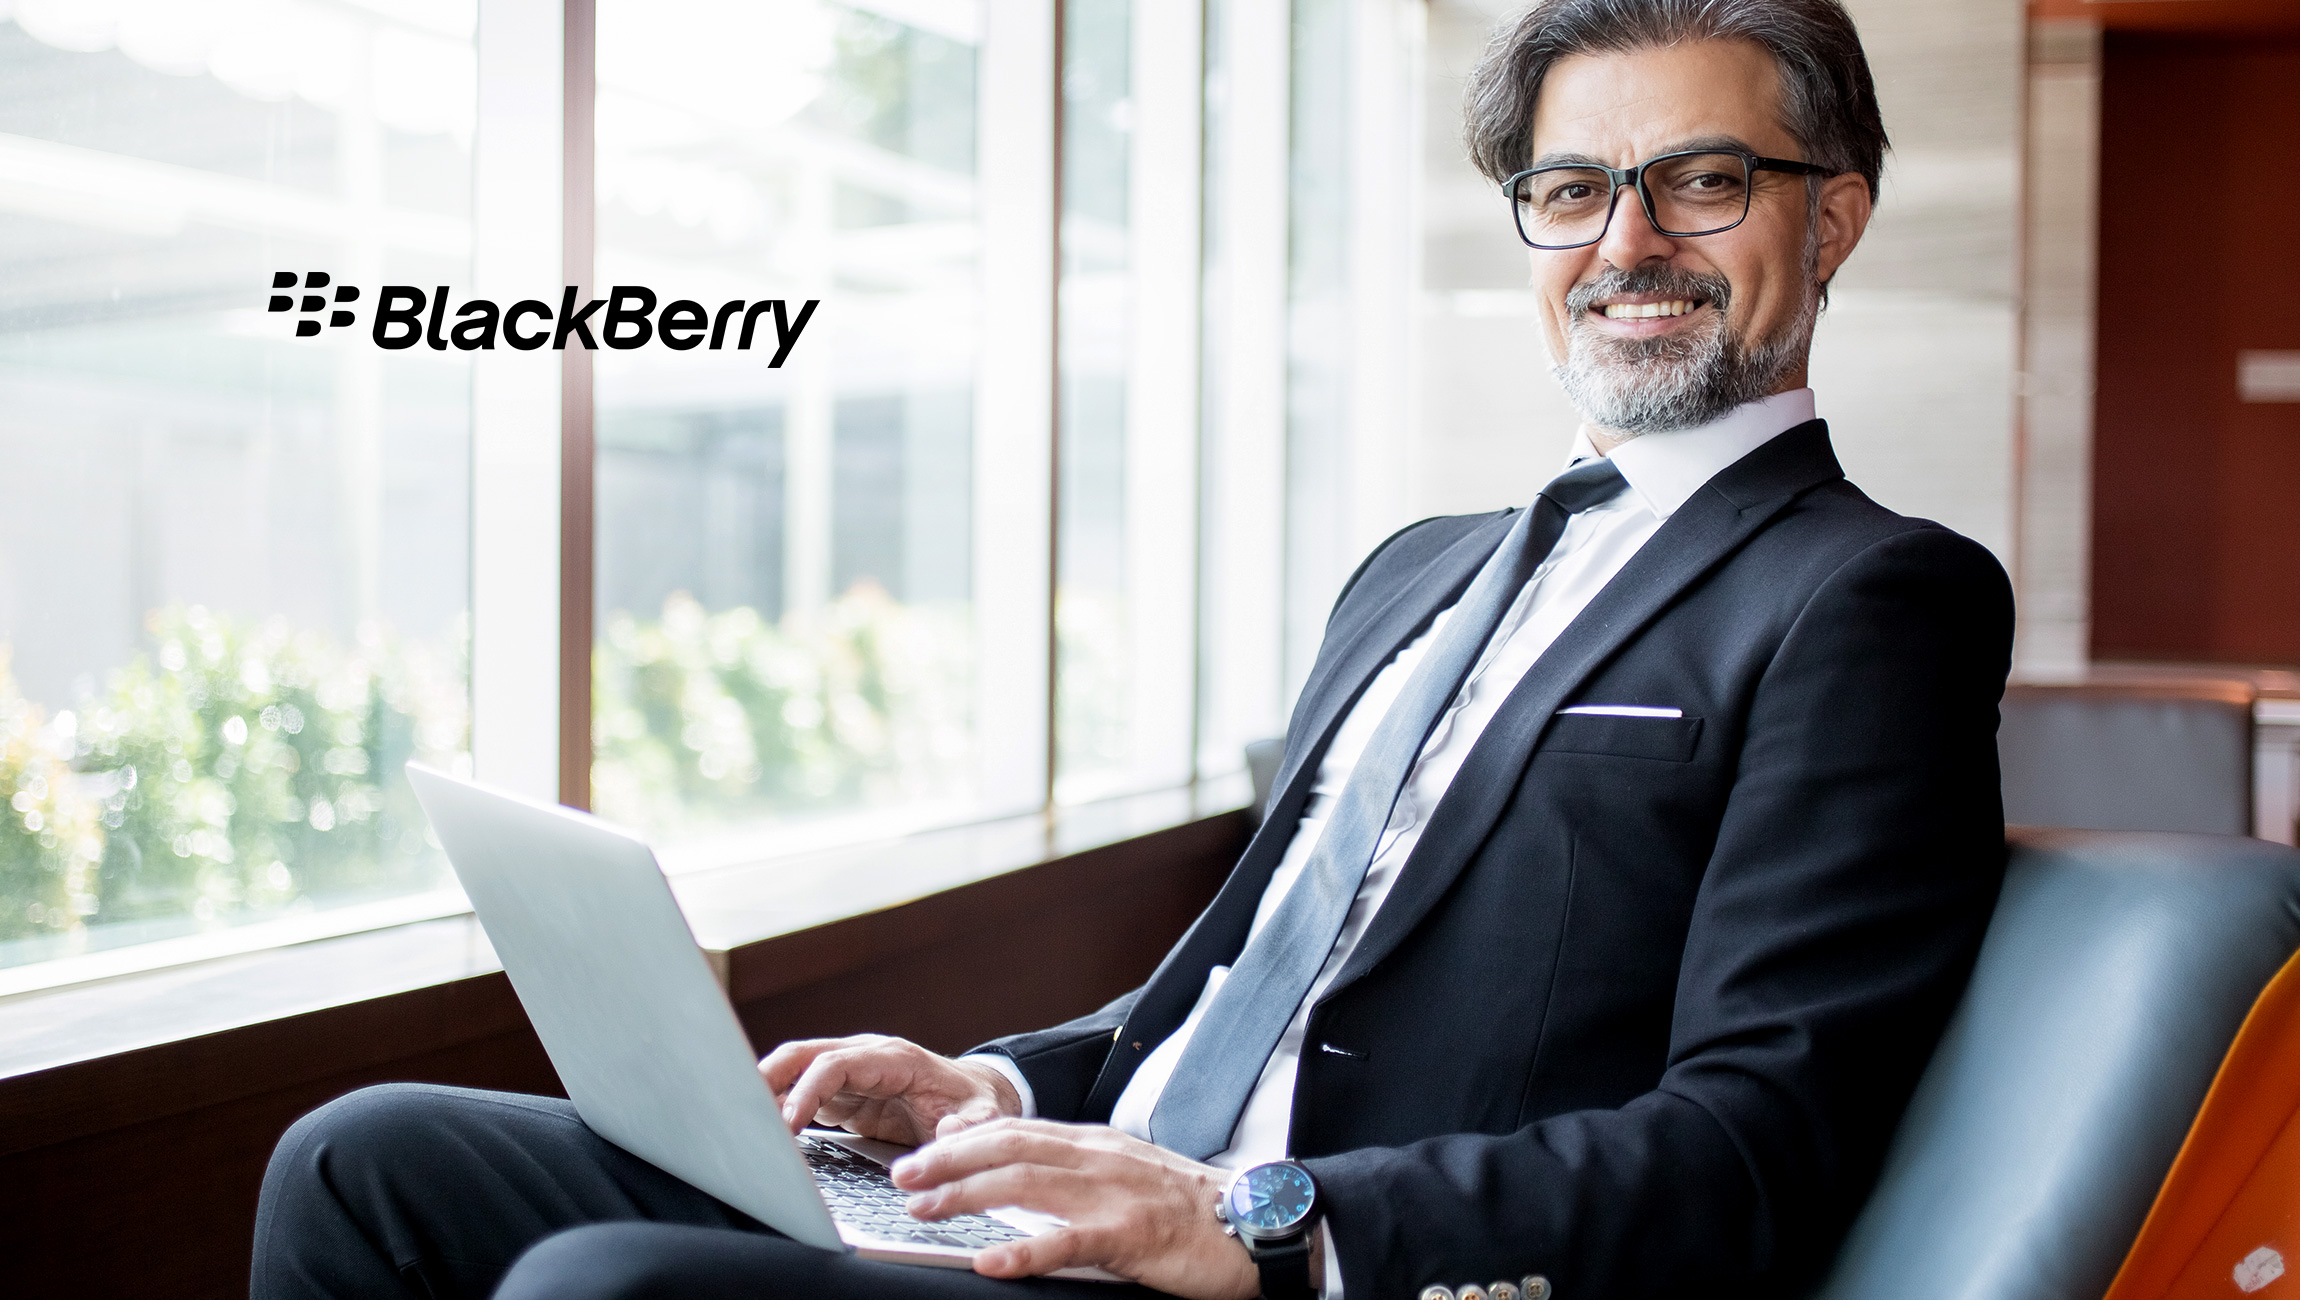 BlackBerry to Help Enable Remote Working Initiatives, Announces Free Availability of Secure Communication Solutions